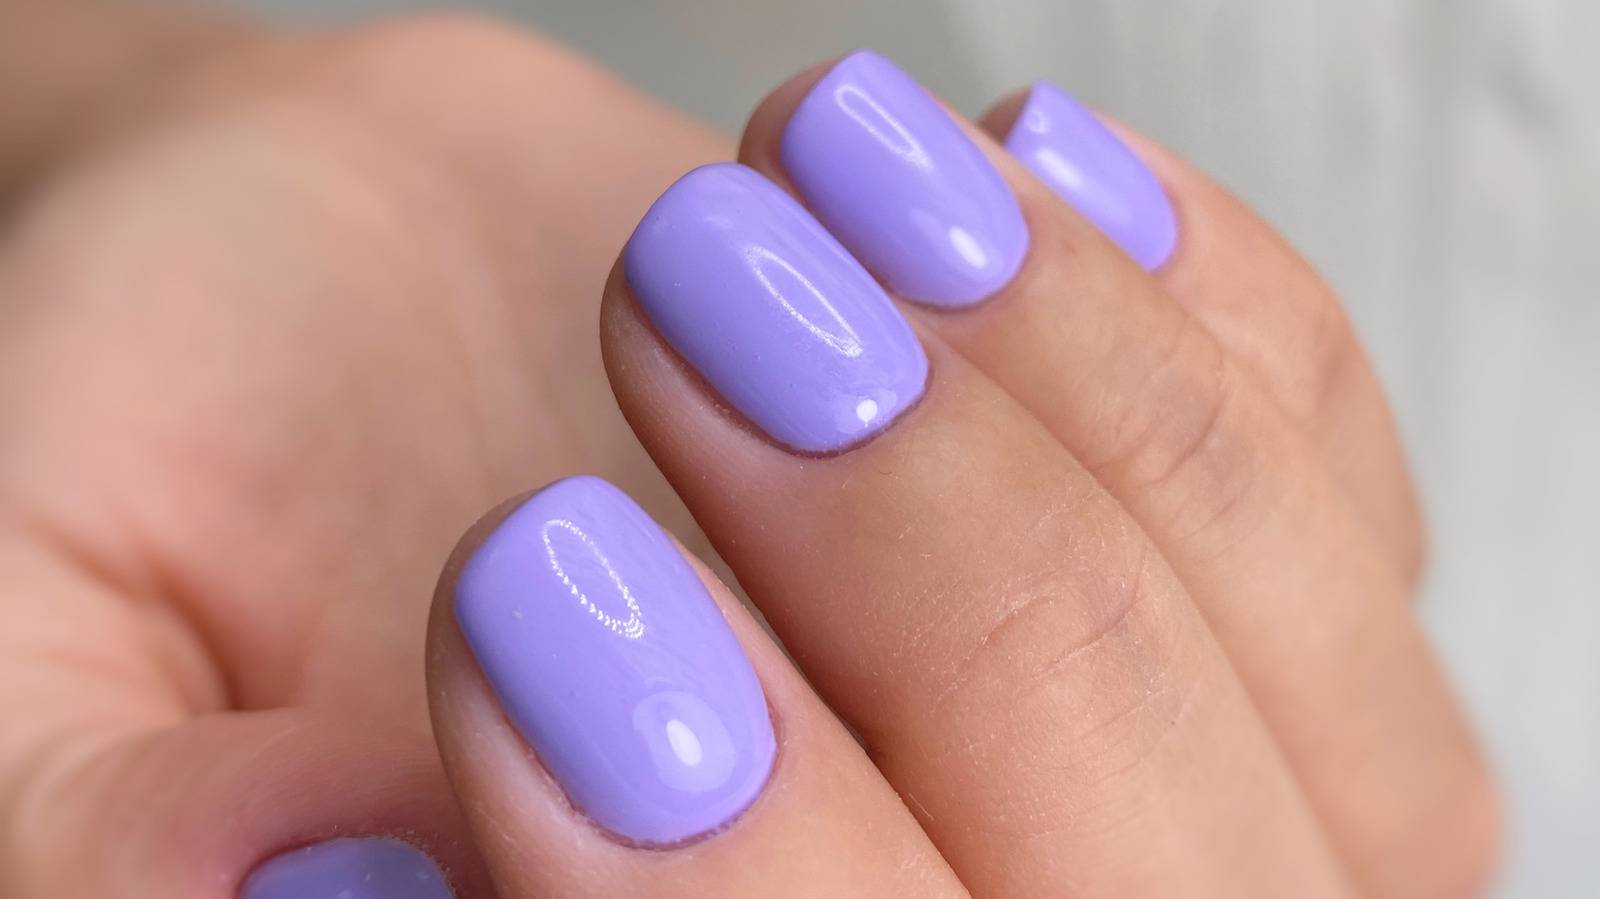 3. Lavender Ombre Nails with Rhinestones - wide 1